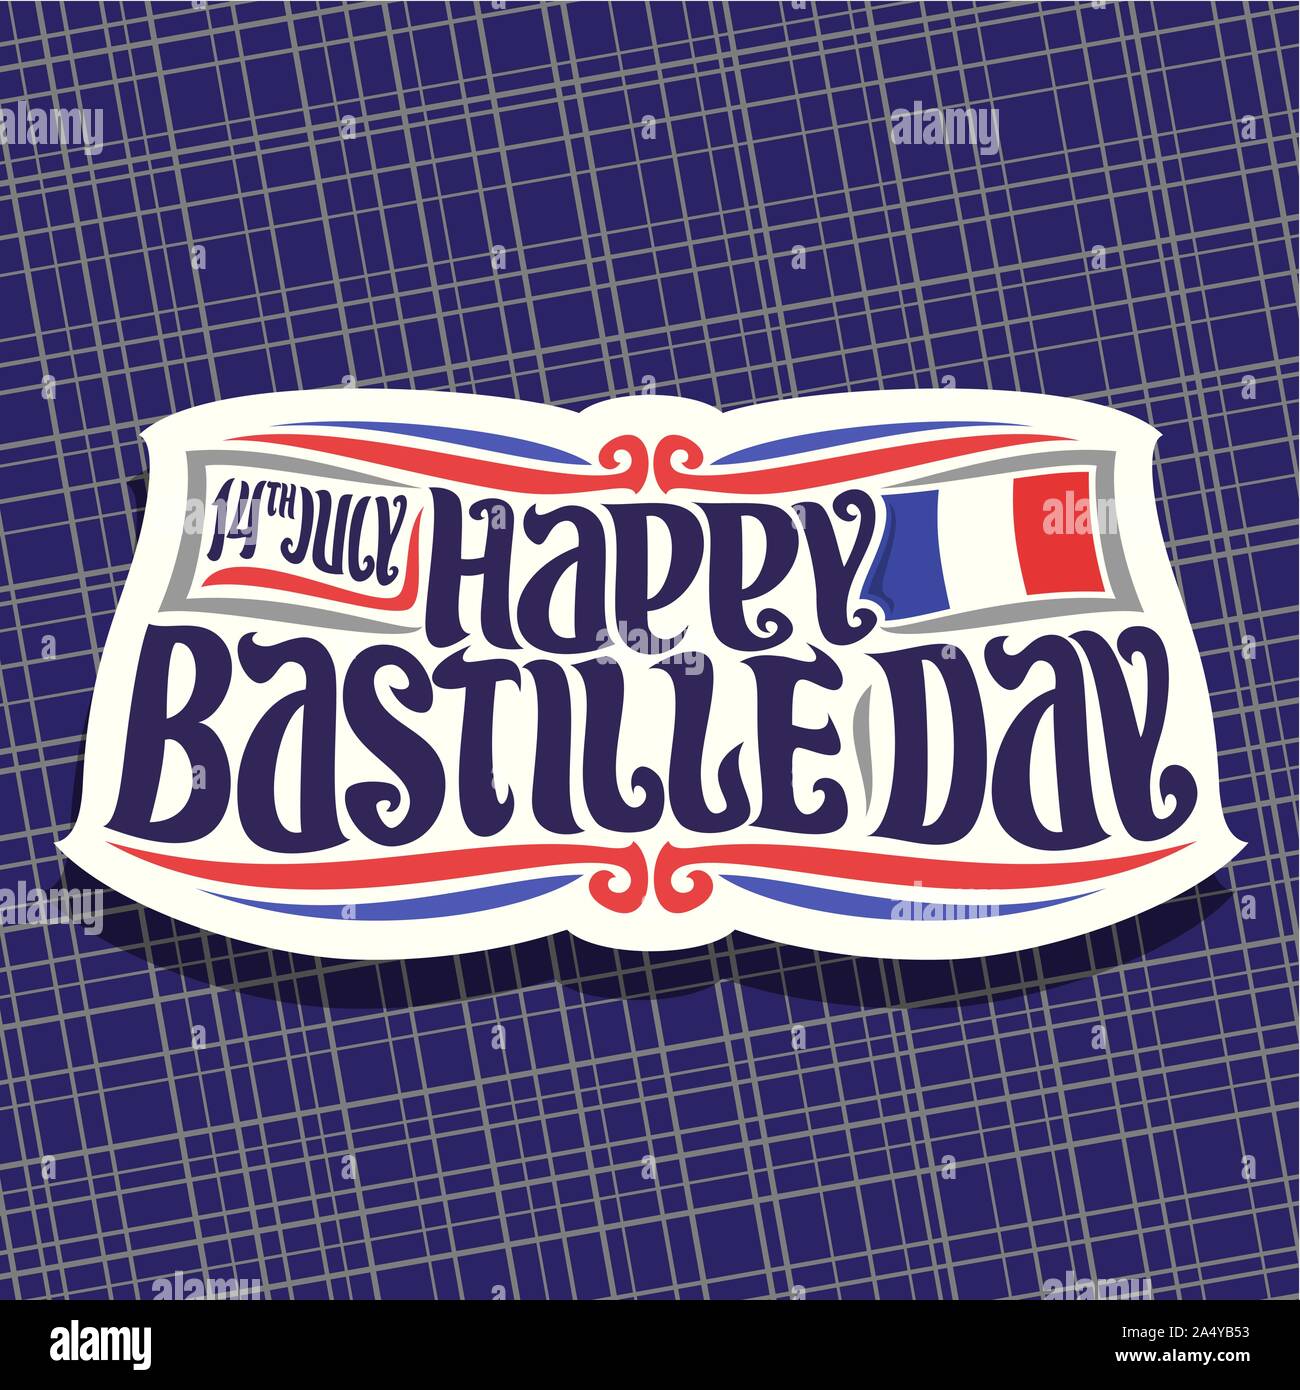 Vector logo for Bastille Day in France, cut paper sign for patriotic holiday of france with date 14th july, original brush typeface for greeting words Stock Vector